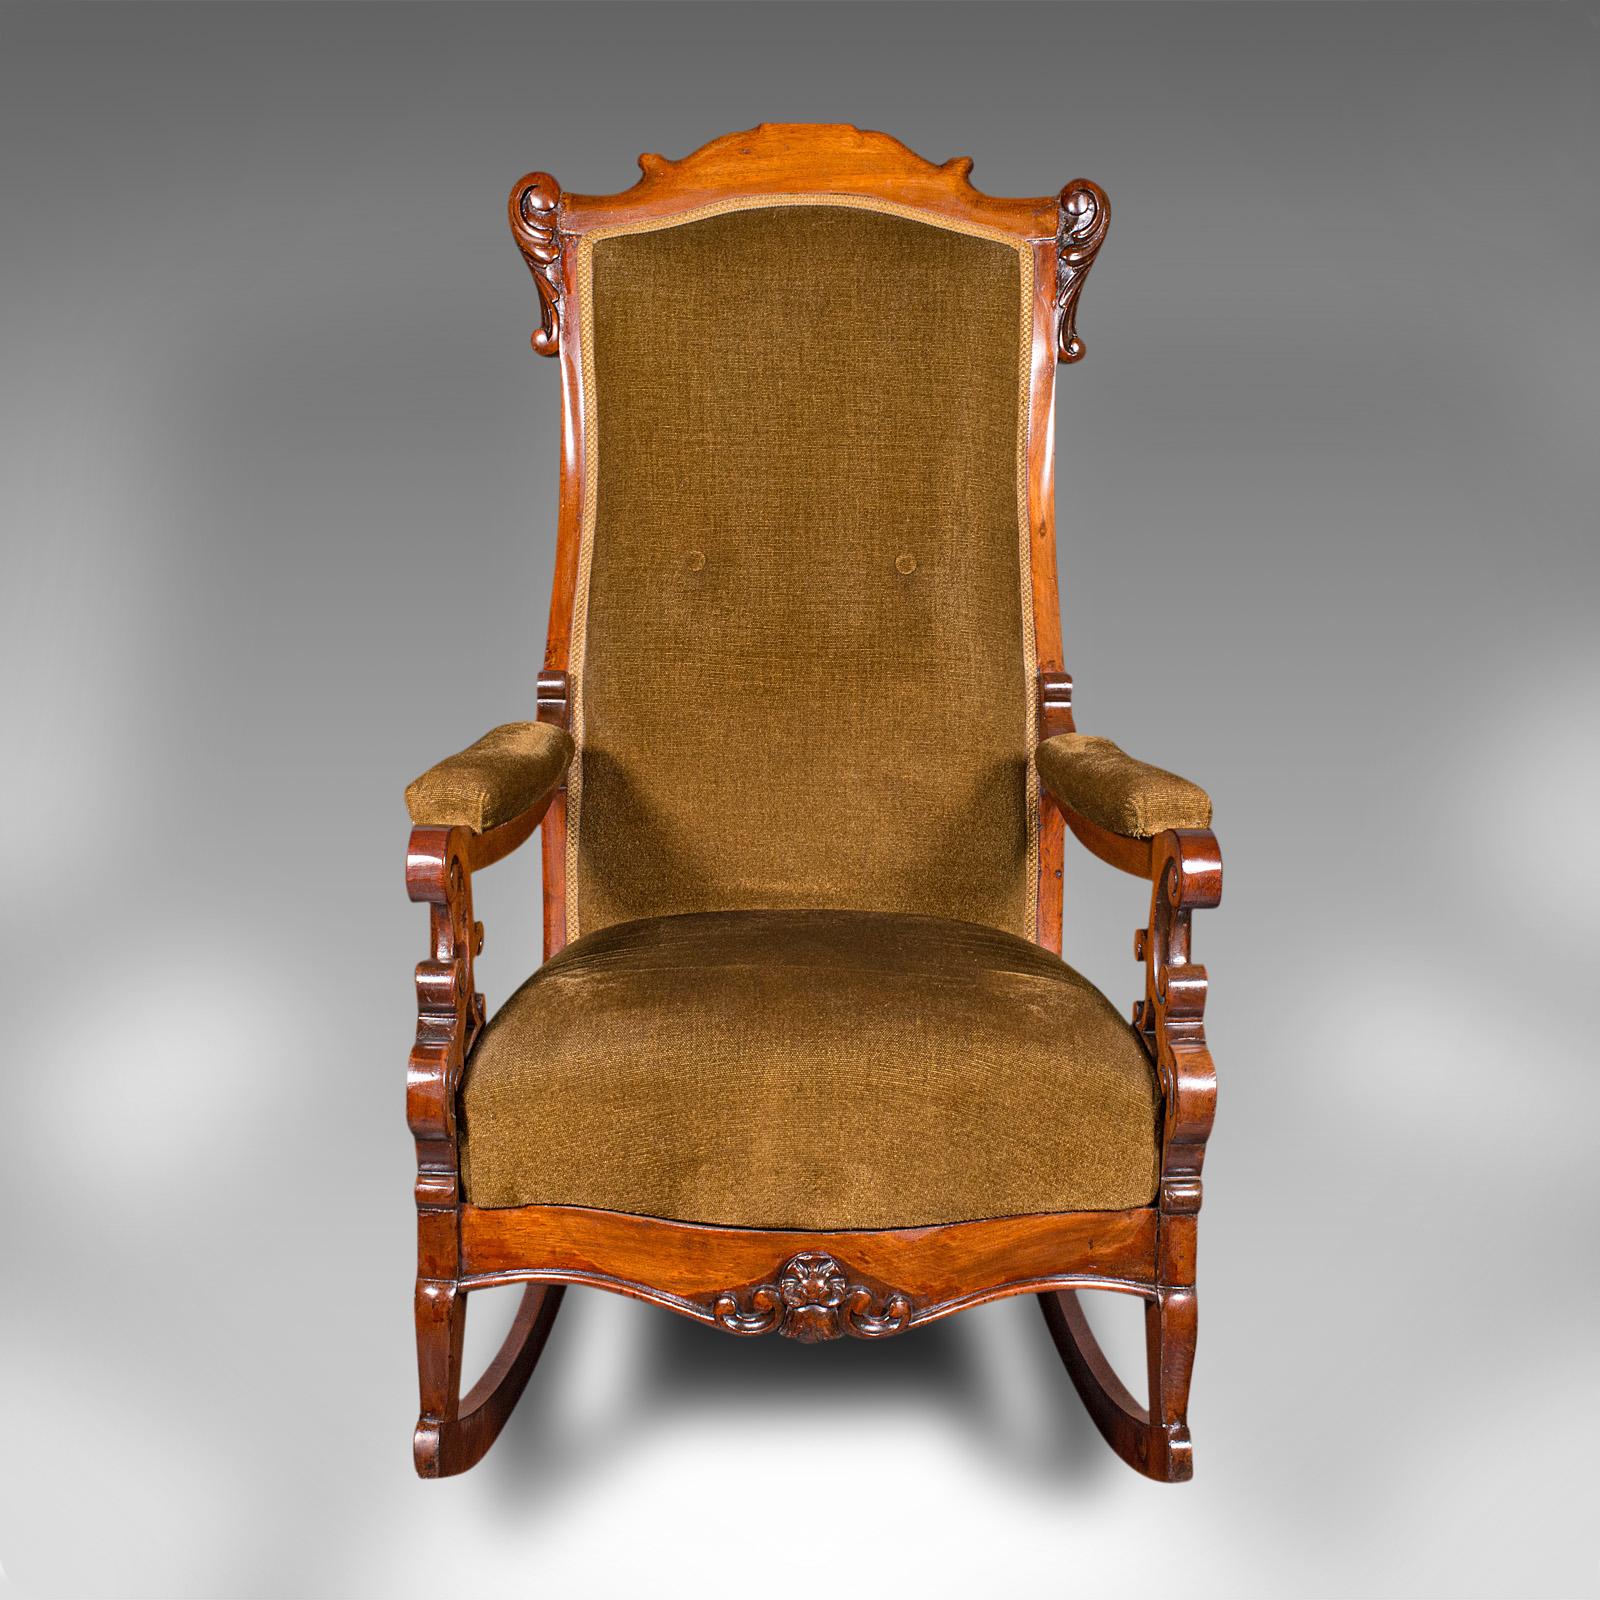 This is an antique rocking chair. An English, walnut framed armchair rocker, dating to the late Victorian period, circa 1880.

Relax and soothe the day away with this attractive rocker
Displays a desirable aged patina and in very good order
Select